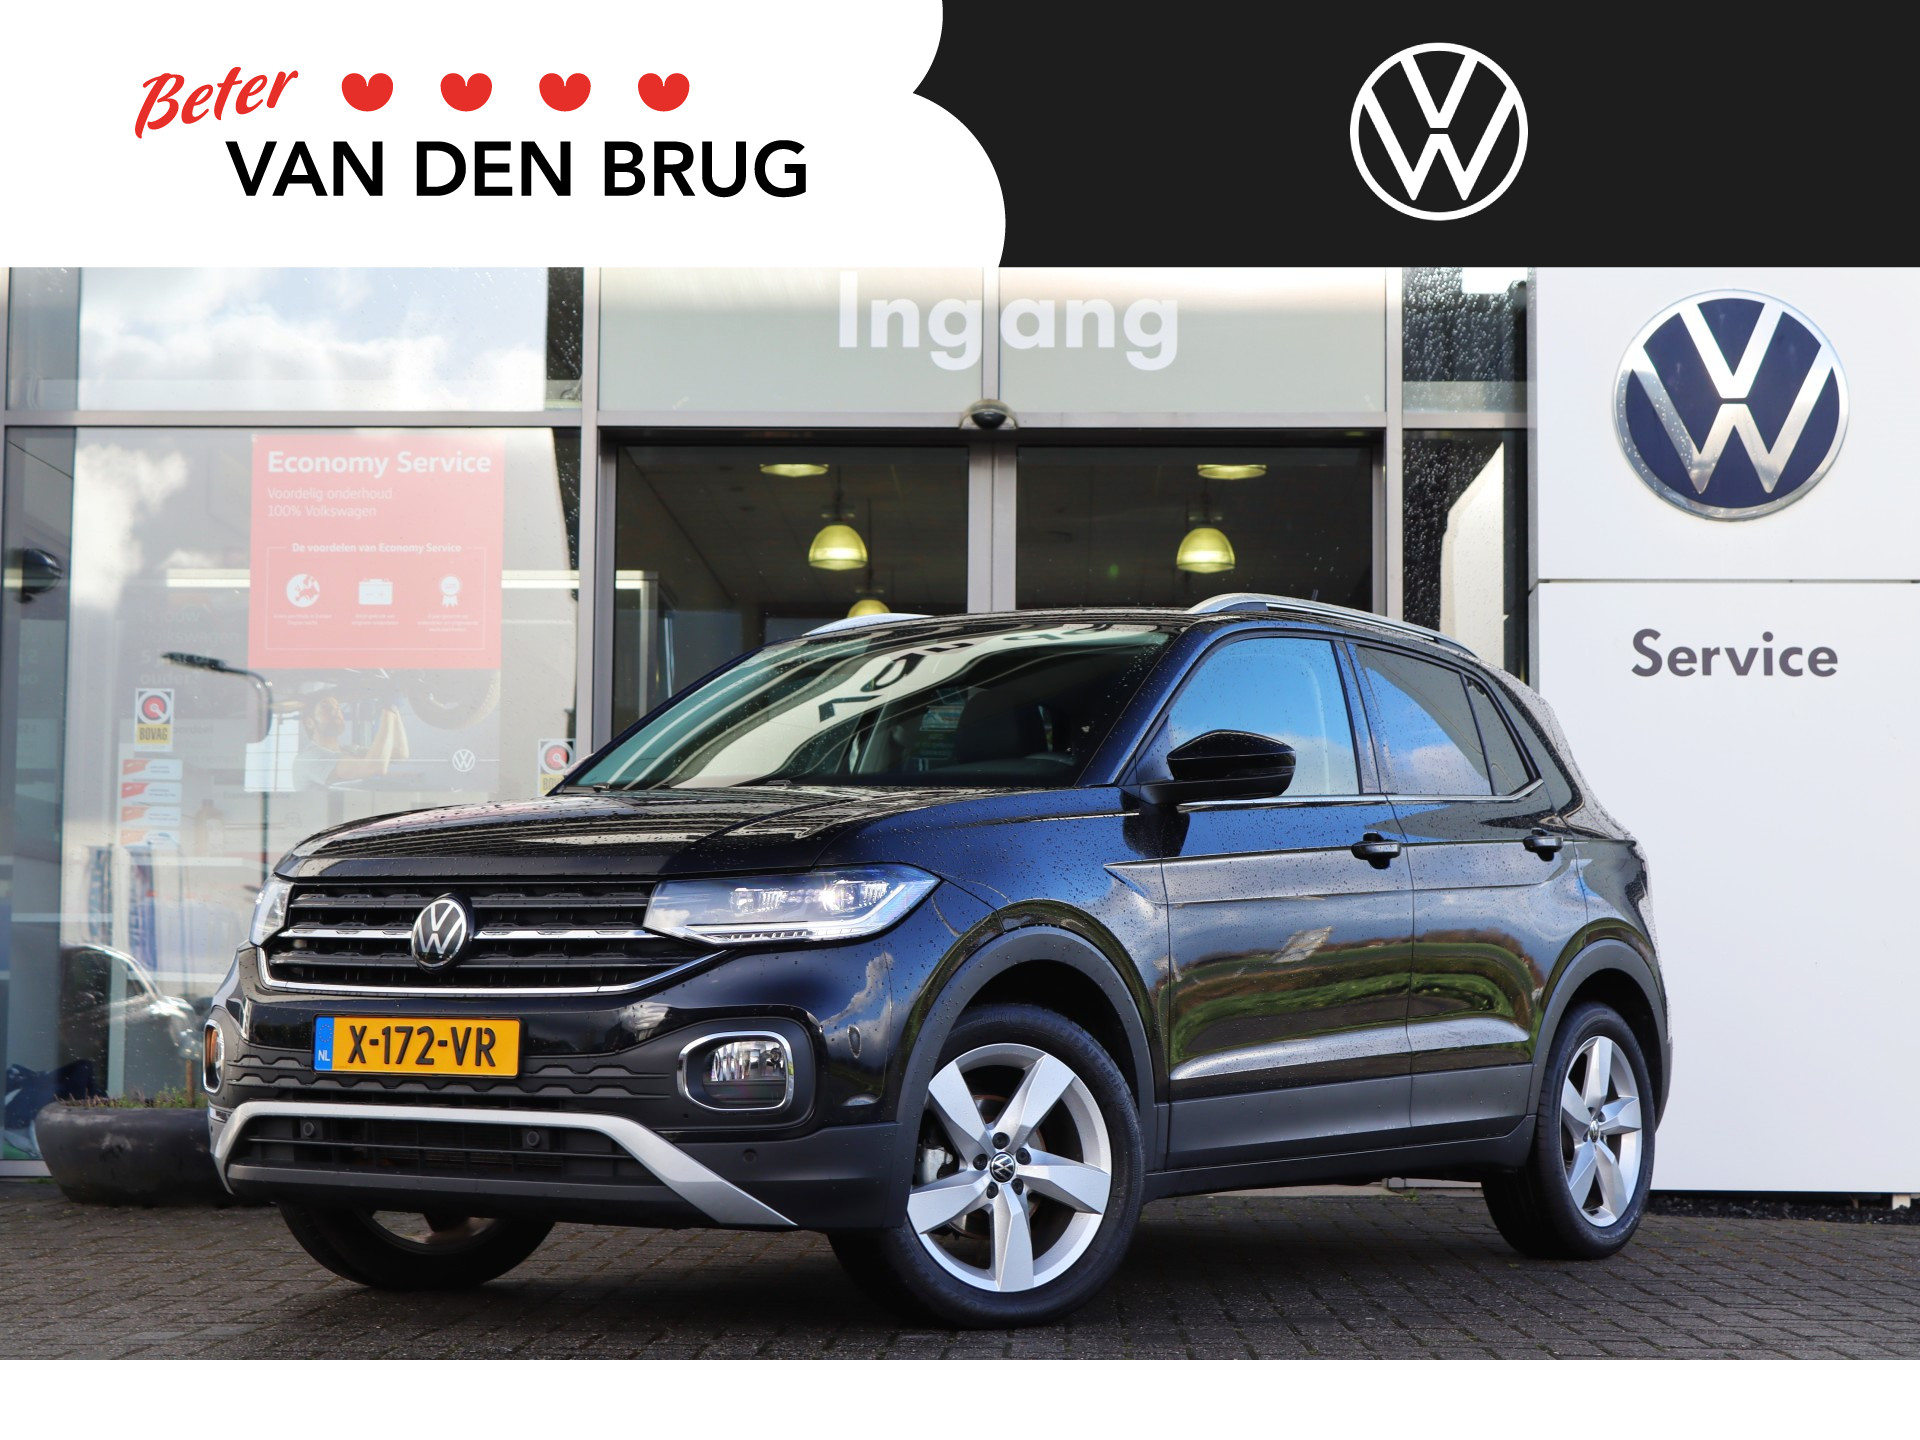 Volkswagen T-Cross 1.5 TSI 150 pk DSG Style | Camera | Stoelverwarming | Climatronic airco | PDC voor & achter | App connect |